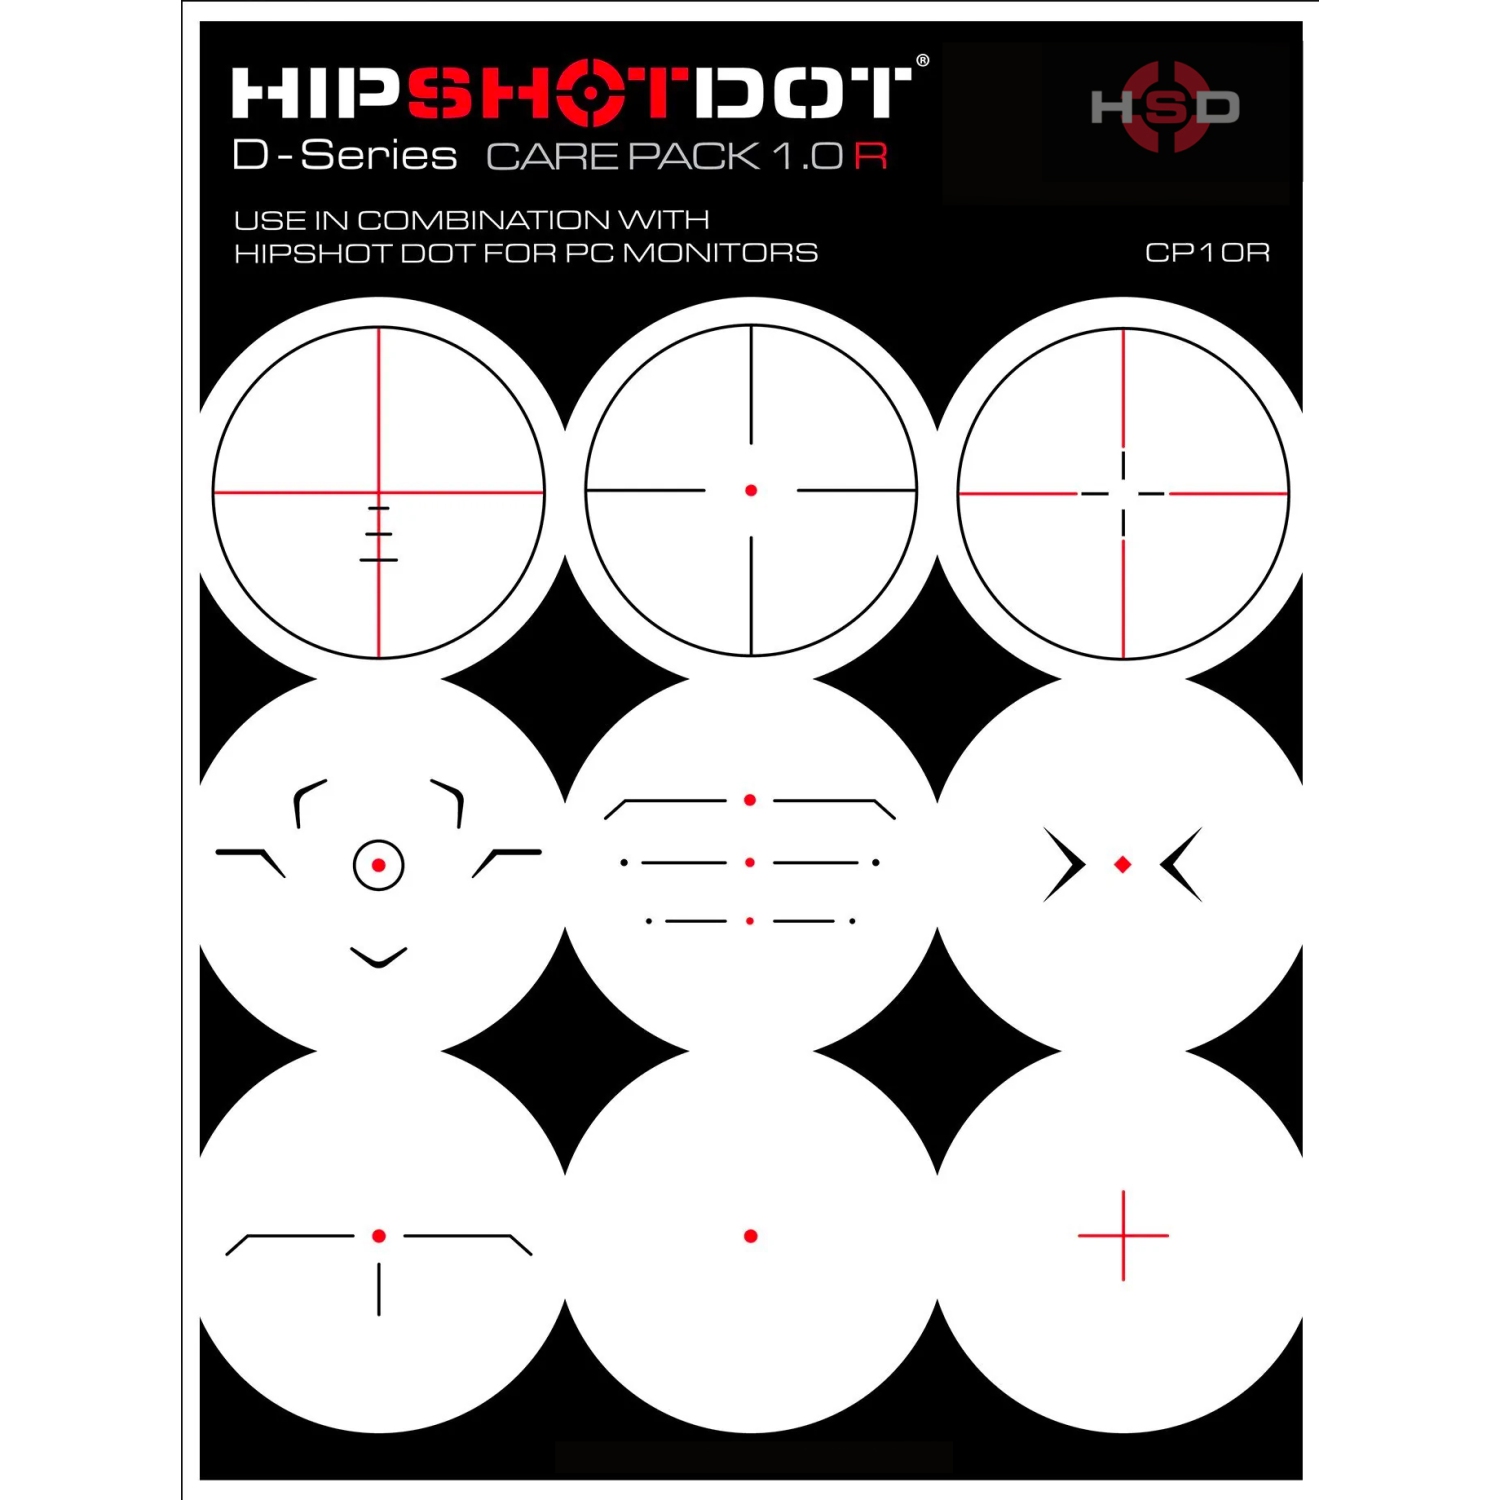 HipShotDot D-Series Tech Pack - Reusable Transparent Aim Sight Assist TV Decals - Gaming Television or Monitor Decal for FPS Video Games Compatible with PC, Xbox & Playstation (CP 1.0, Red)